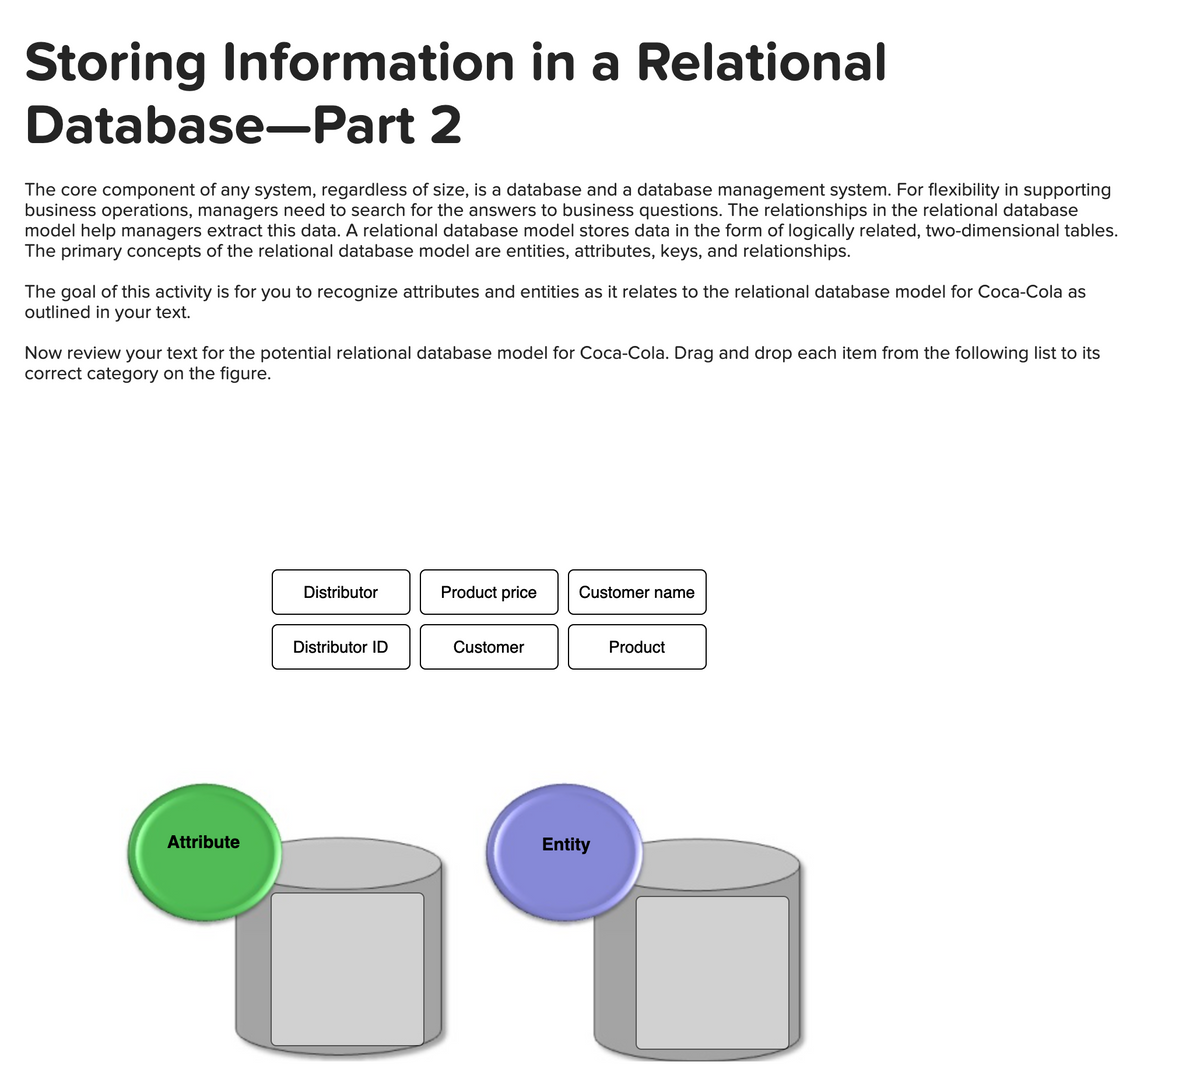 Storing Information in a Relational
Database-Part 2
The core component of any system, regardless of size, is a database and a database management system. For flexibility in supporting
business operations, managers need to search for the answers to business questions. The relationships in the relational database
model help managers extract this data. A relational database model stores data in the form of logically related, two-dimensional tables.
The primary concepts of the relational database model are entities, attributes, keys, and relationships.
The goal of this activity is for you to recognize attributes and entities as it relates to the relational database model for Coca-Cola as
outlined in your text.
Now review your text for the potential relational database model for Coca-Cola. Drag and drop each item from the following list to its
correct category on the figure.
Distributor
Product price
Customer name
Distributor ID
Customer
Product
Attribute
Entity
